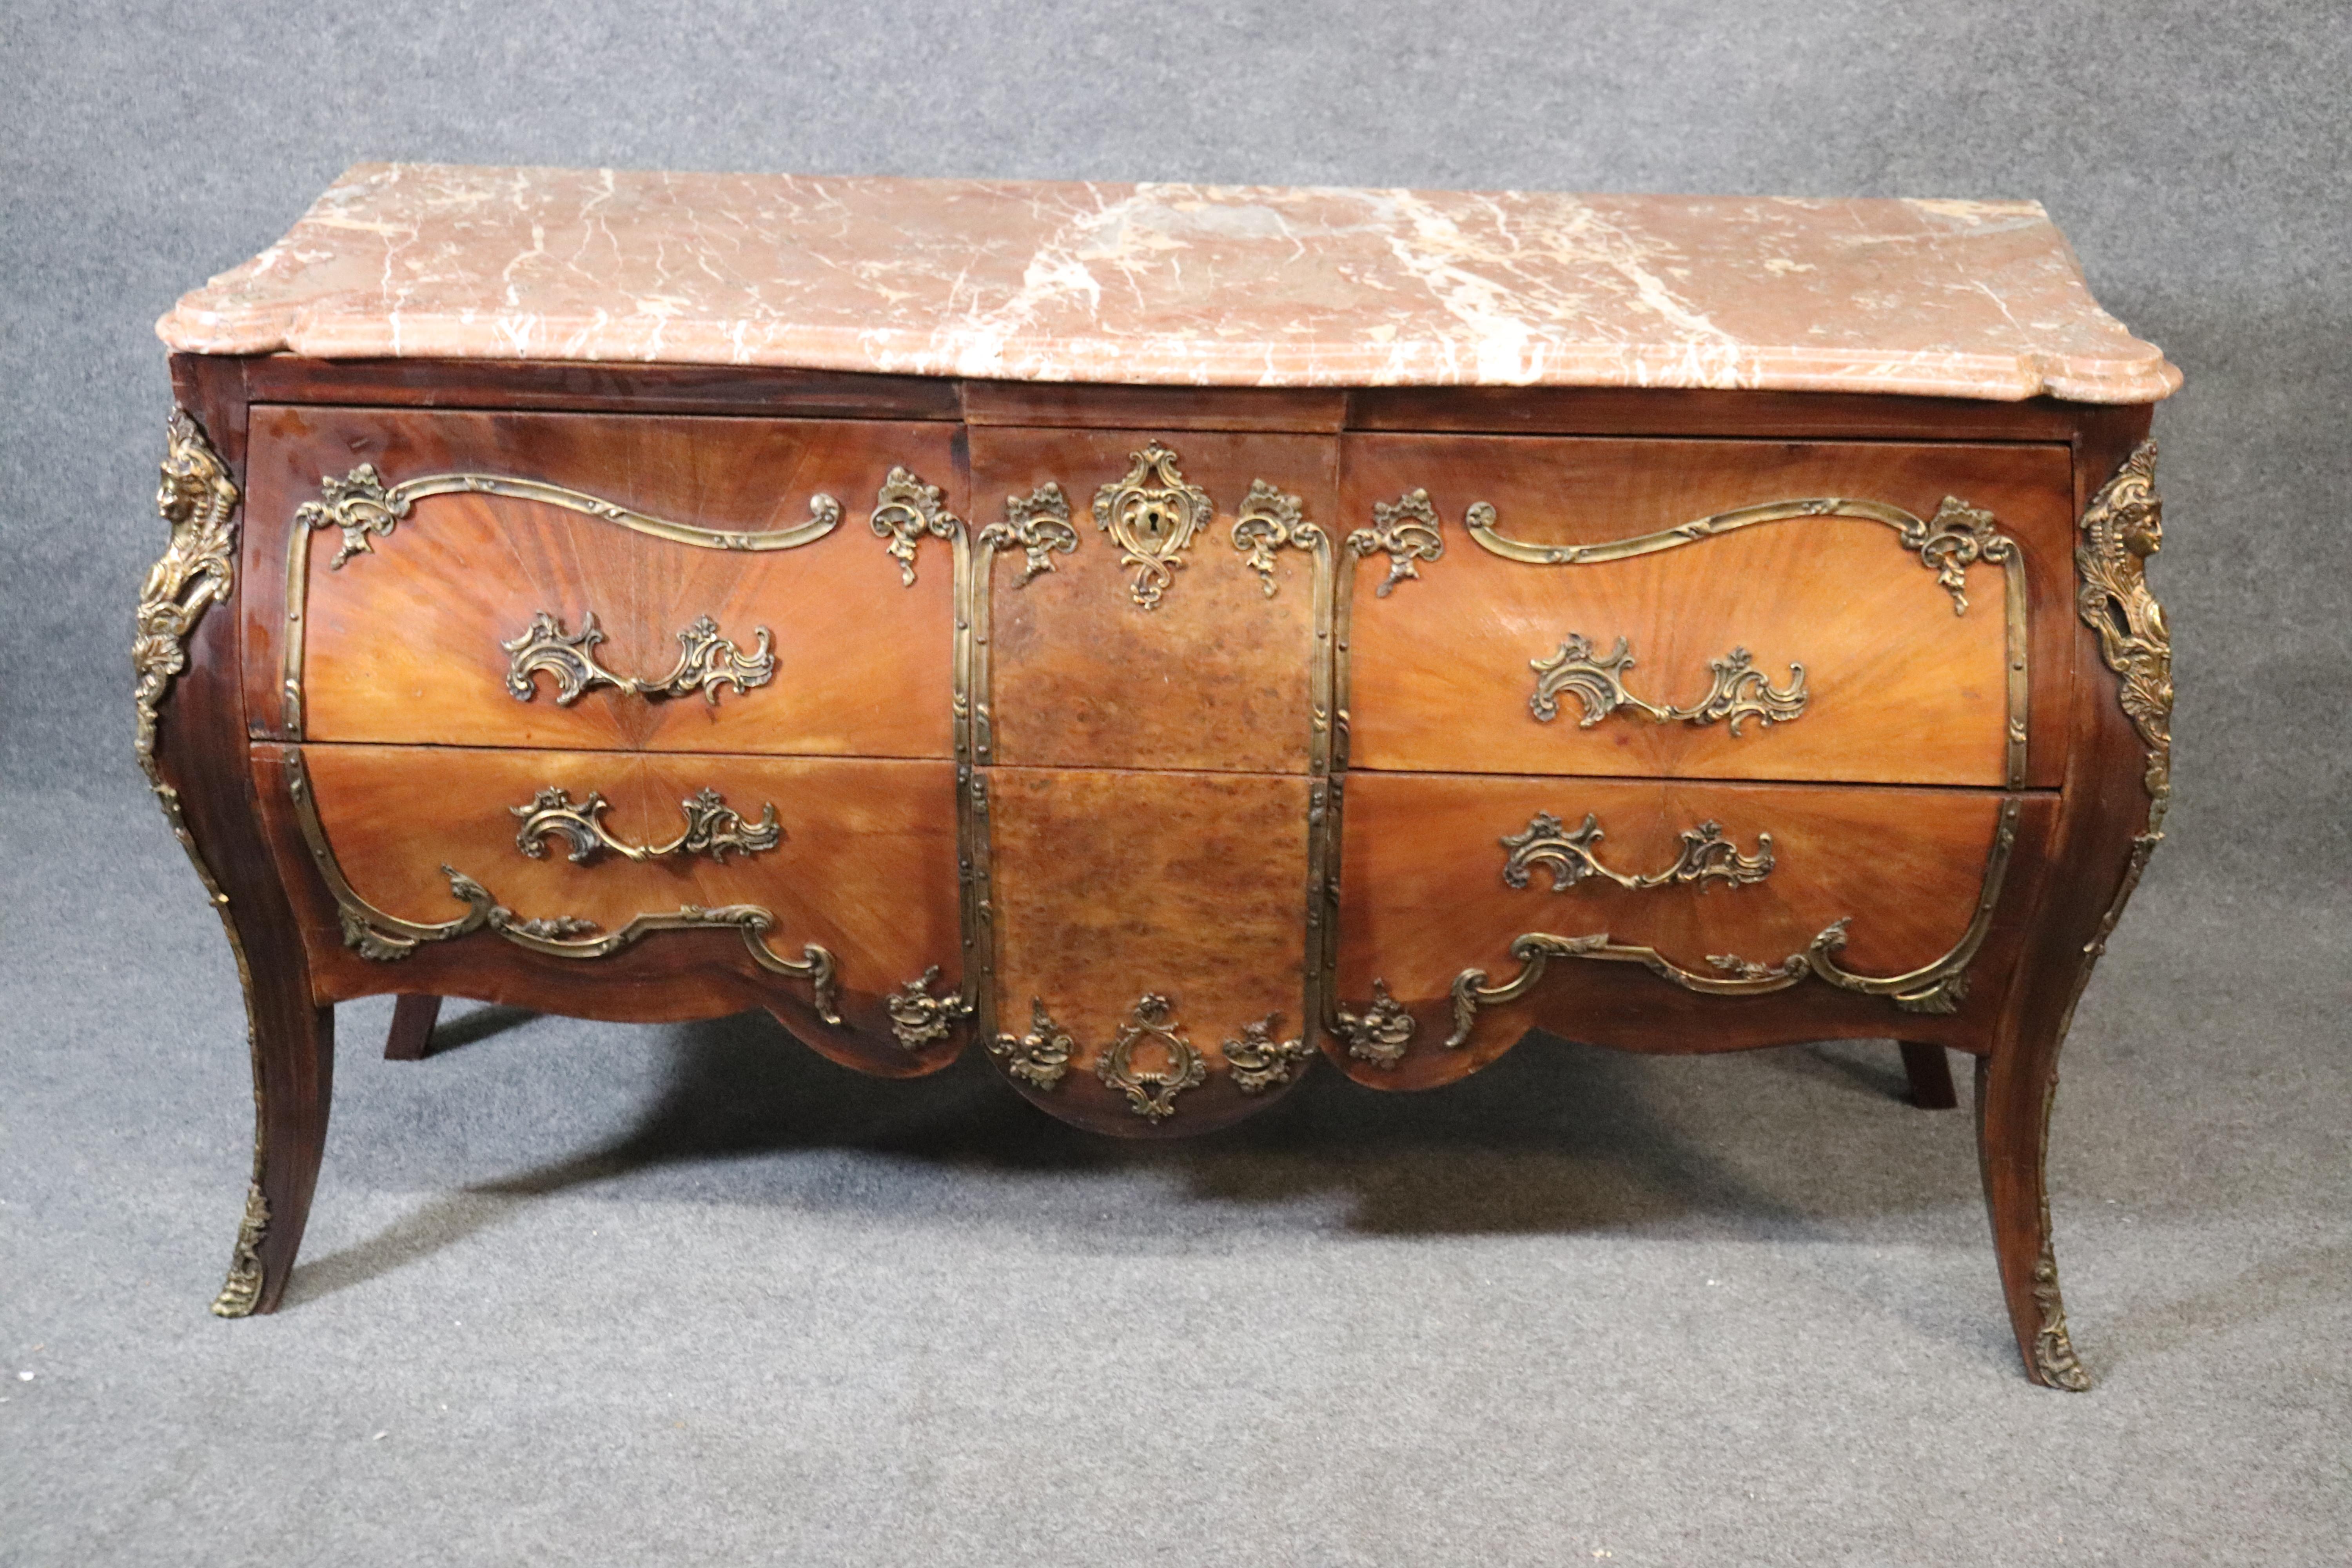 This is a beautiful French commode in the manner of Francois Linke of France. The commode features wonderful cast bronze maidens and ormolu troughout the case and a great slab of figured marble on top. The commode measures 60 wide x 22 deep x 34